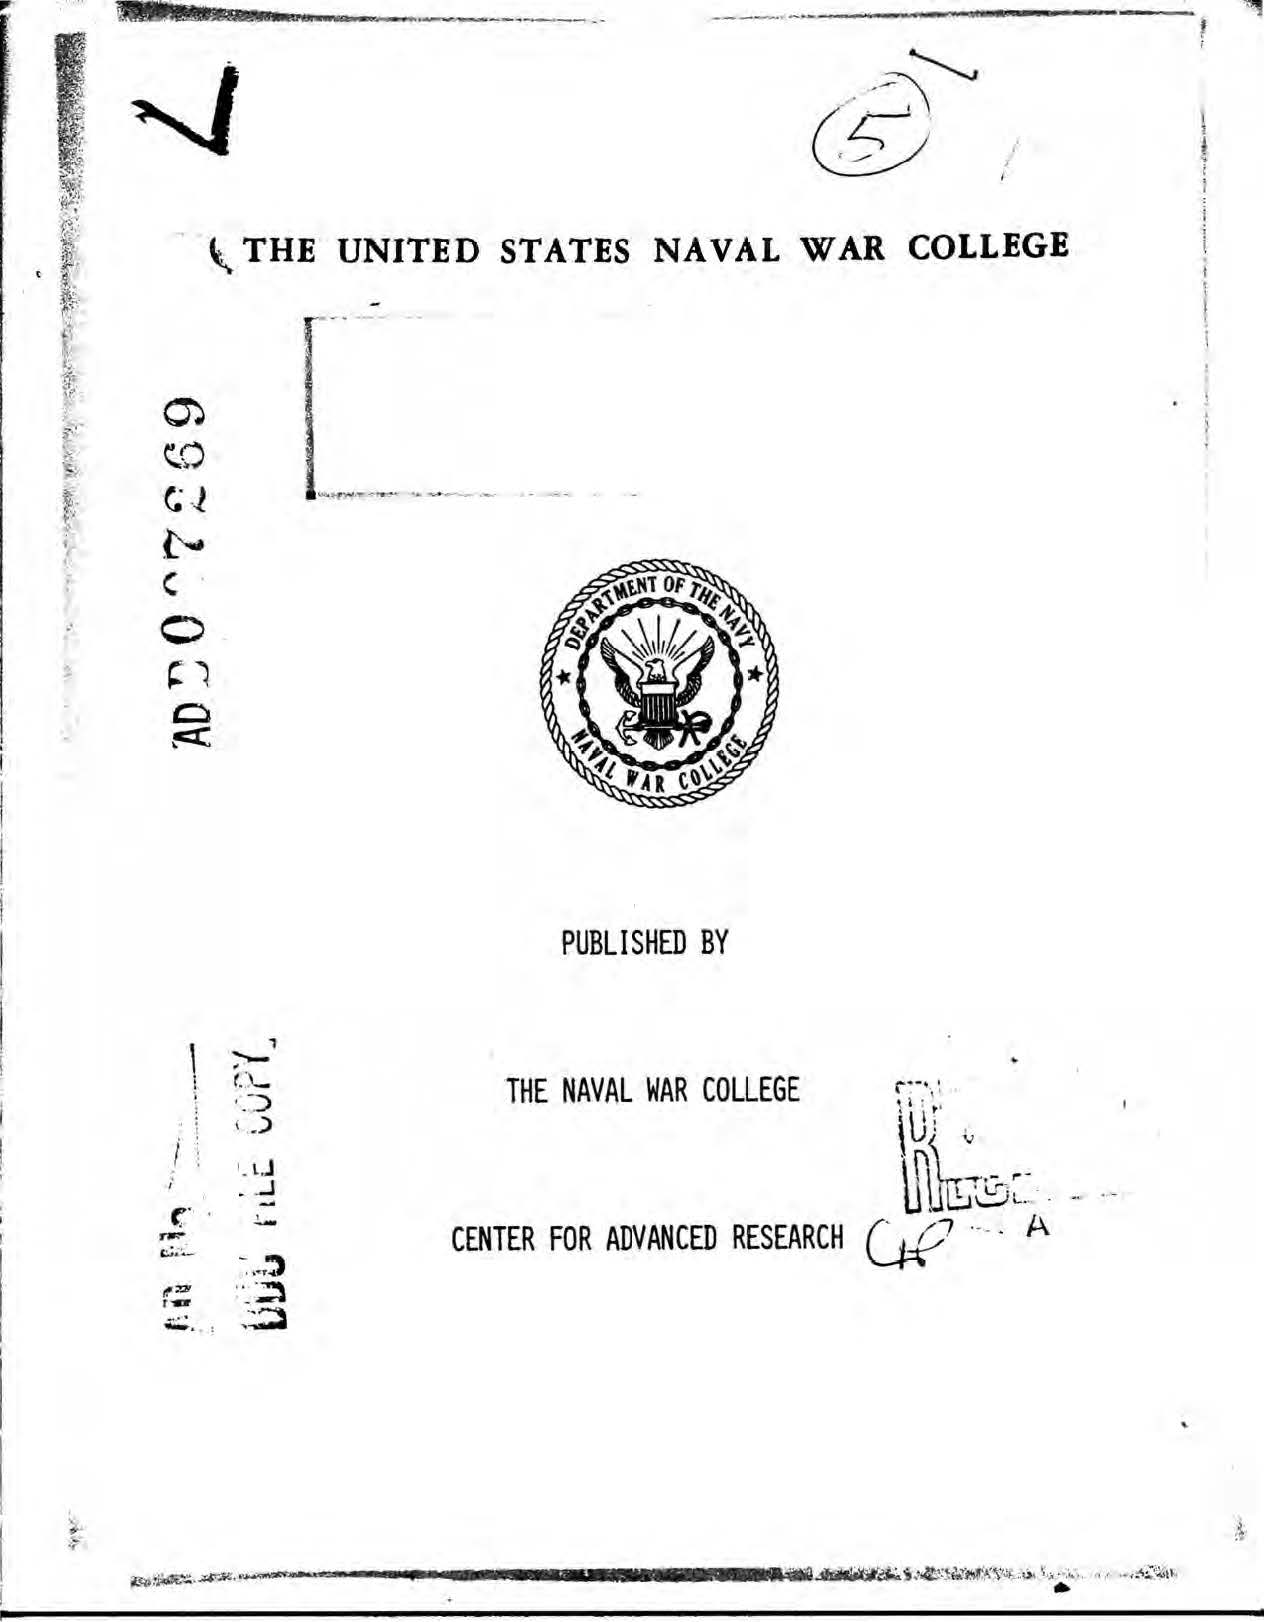 United States Naval War College, 1919-1941: an institutional response to naval preparedness by Gearld John Kennedy